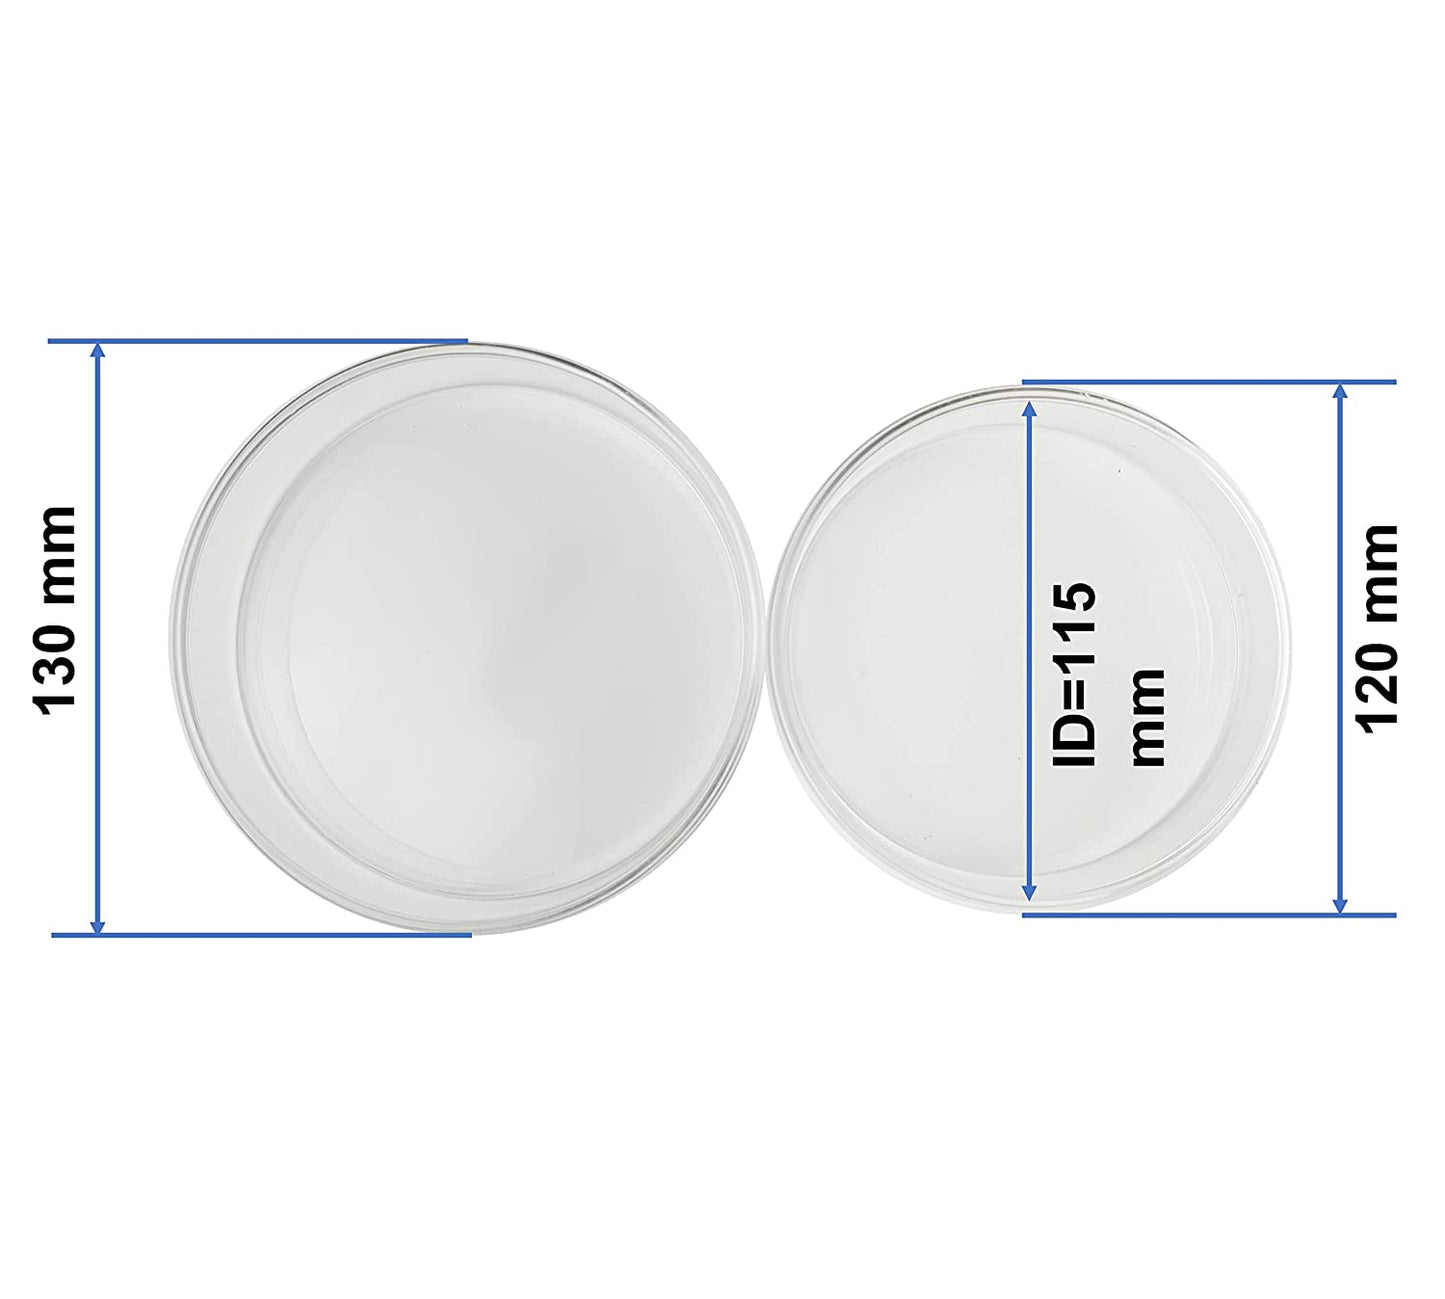 120mm OD Glass Petri Dish with Lid (Case of 60)